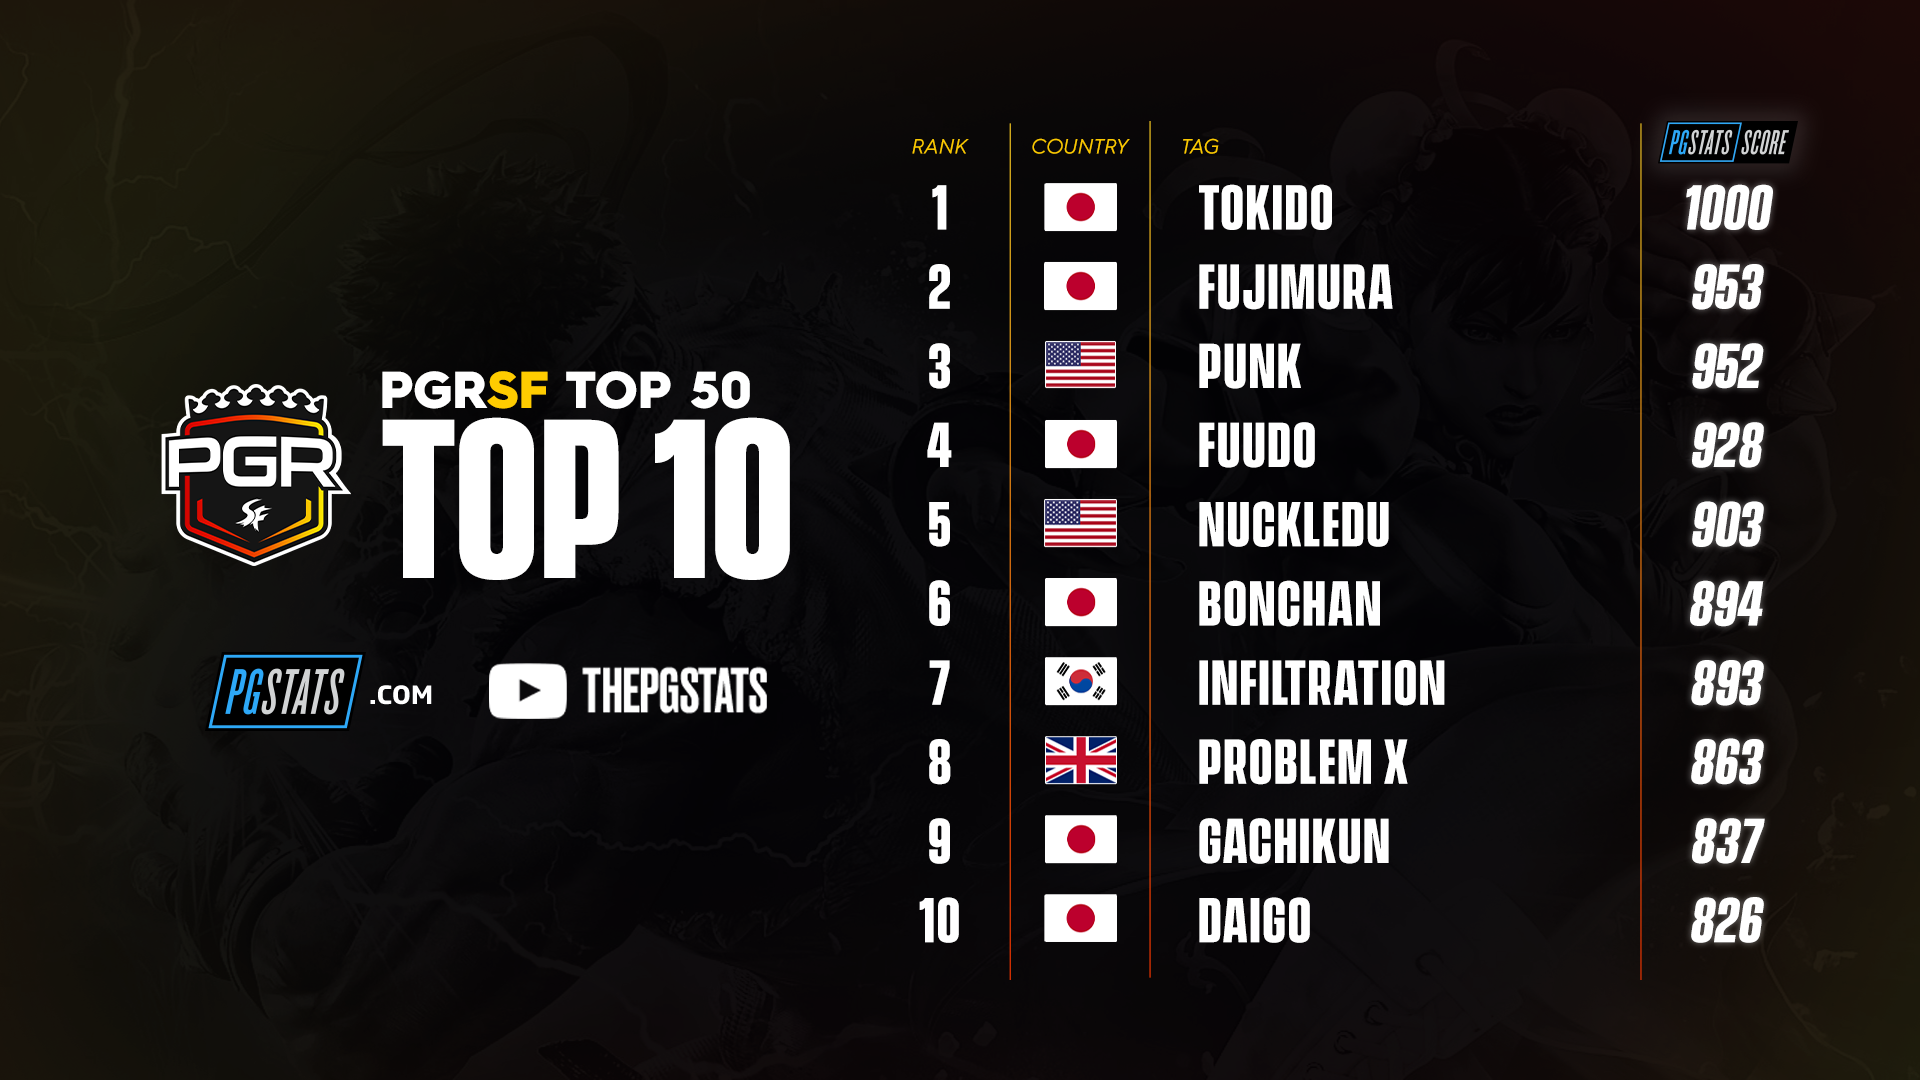 Street fighter players: The Top 10 earners in SFV